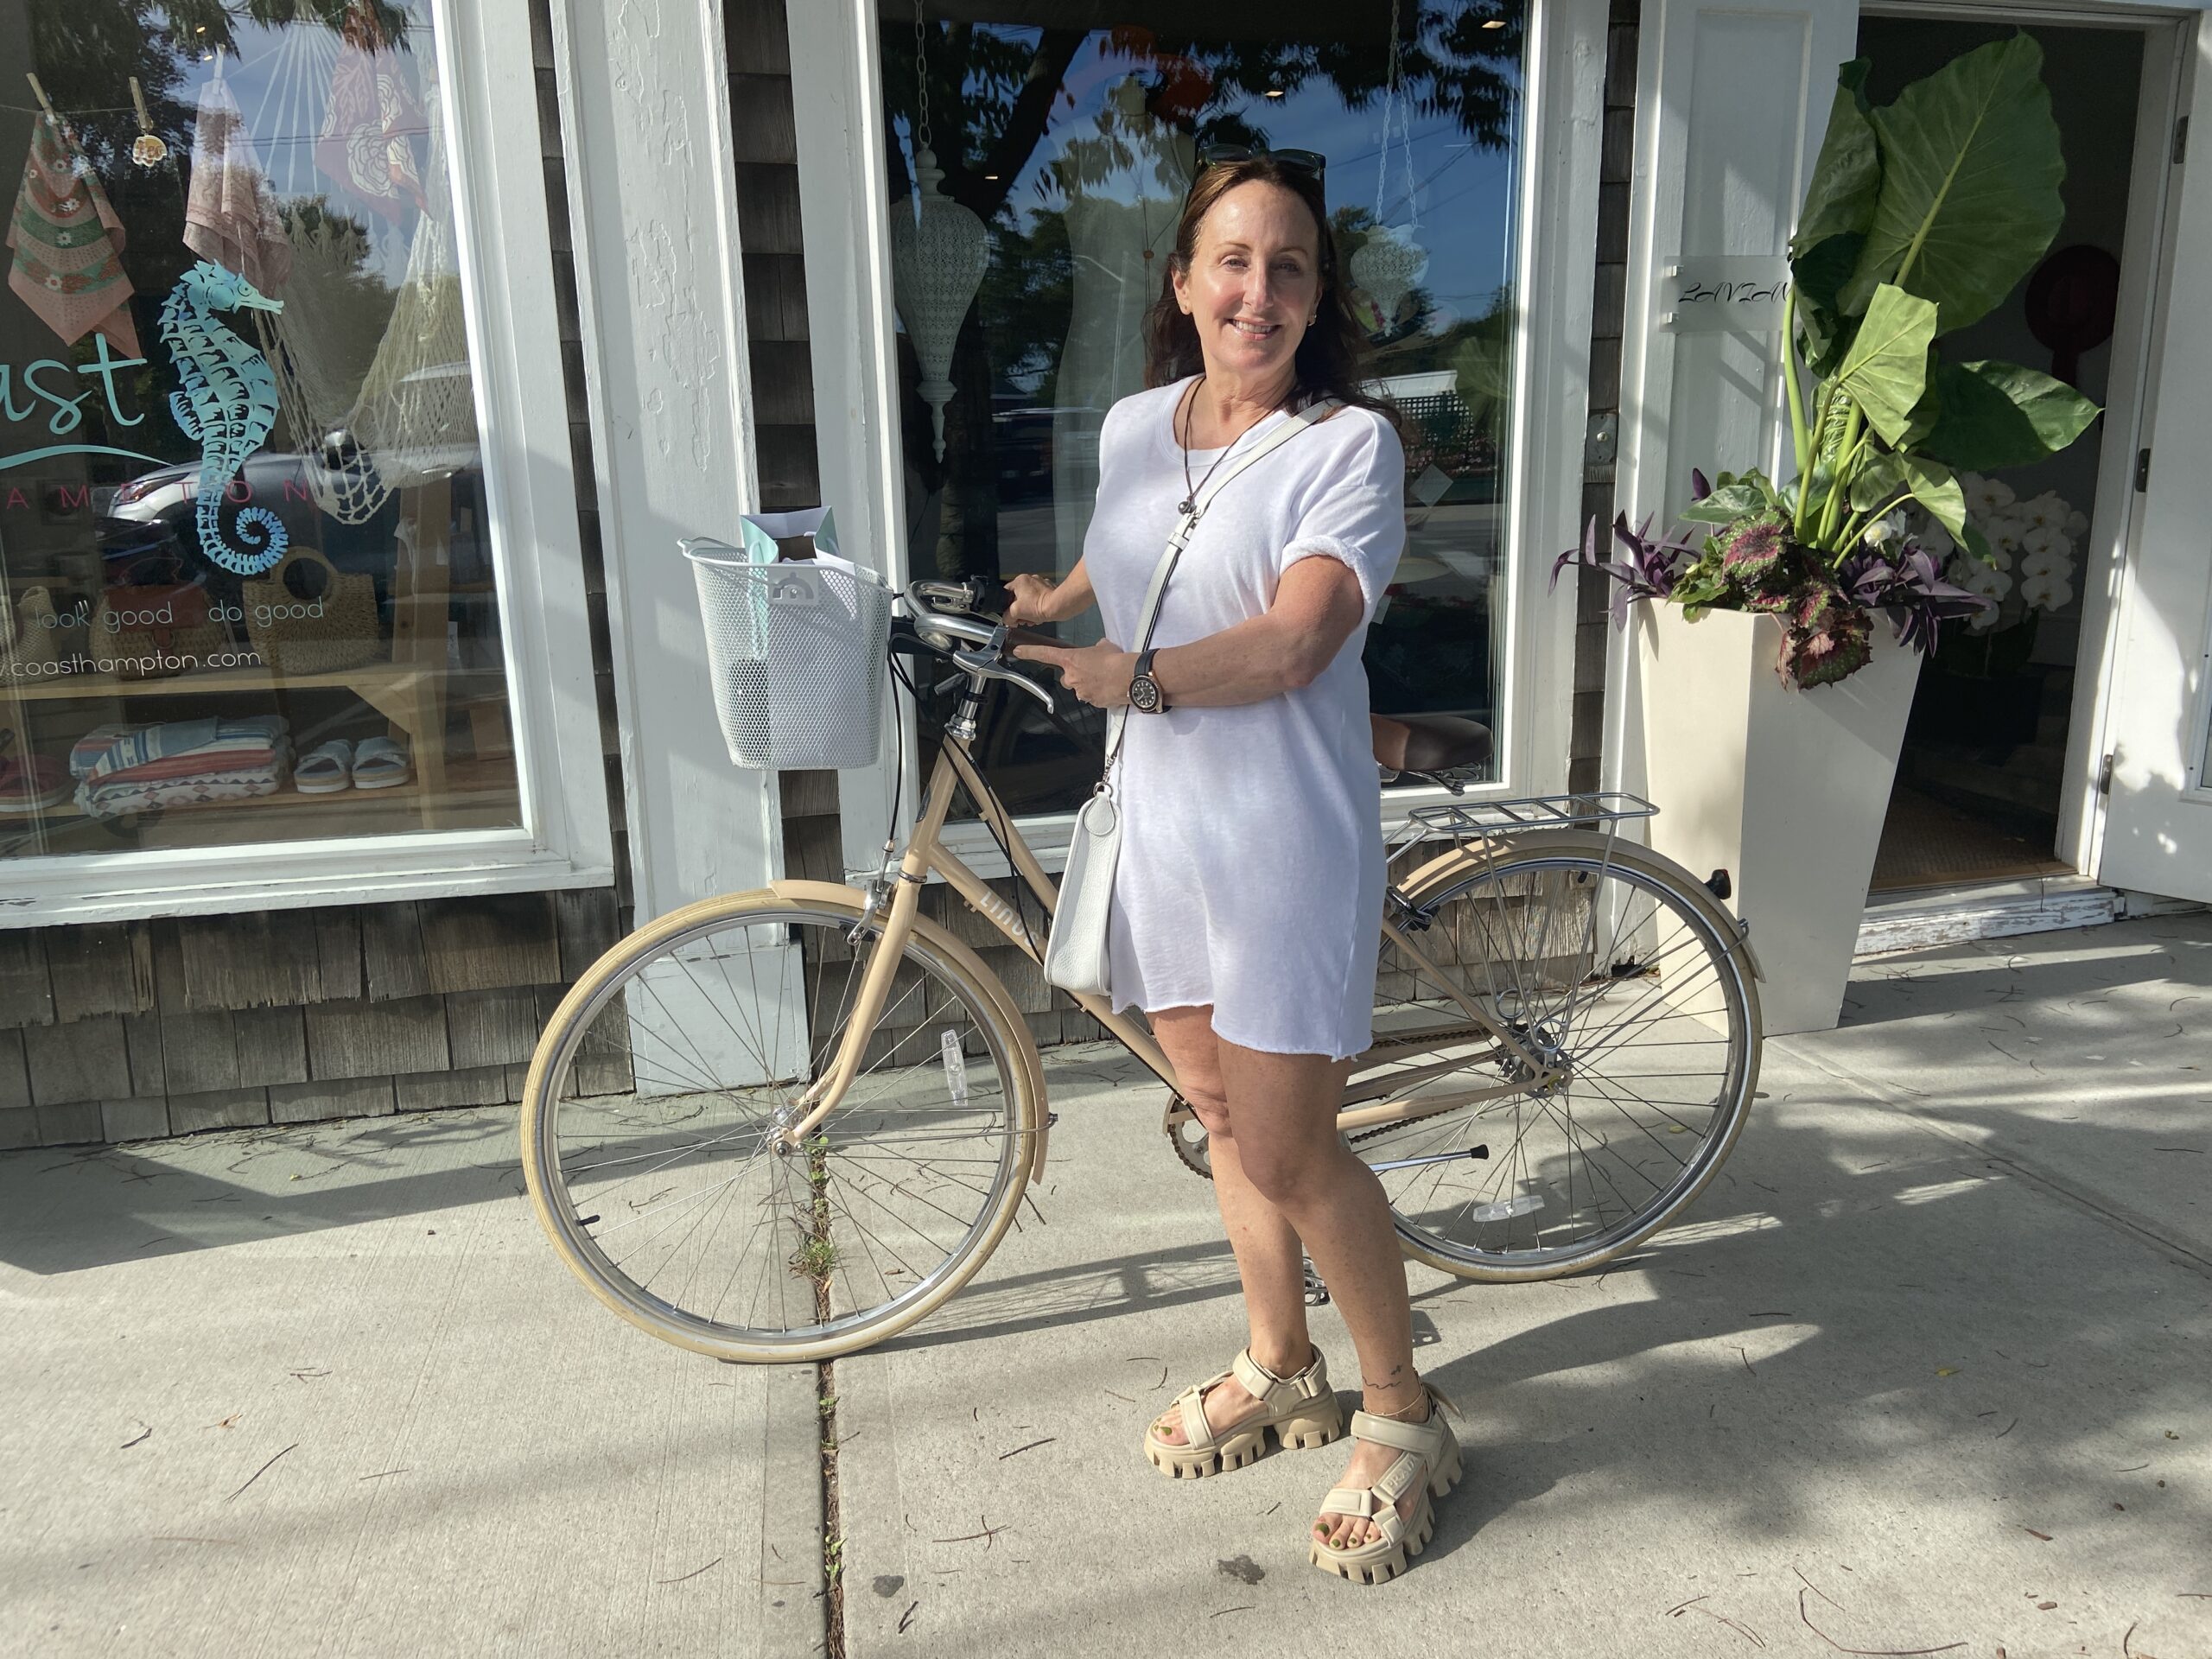 BY JULIA HEMING Laurie Kamisky of Southampton with her bike in a coastal grandmother white tee shirt dress.